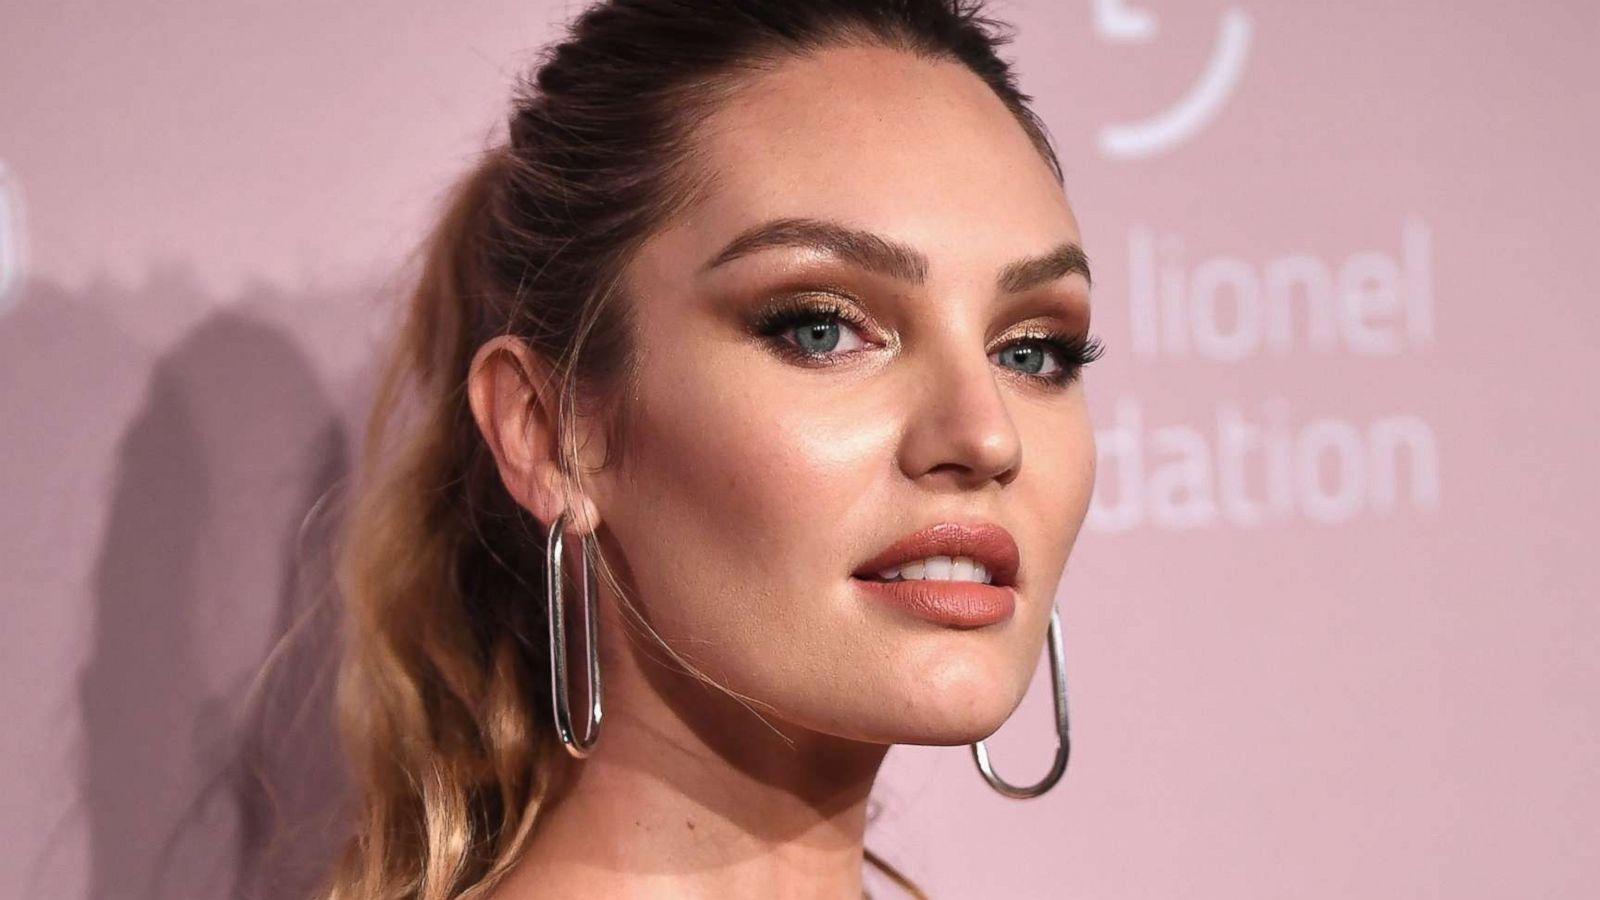 PHOTO: Candice Swanepoel attends an event at Cipriani Wall Street on Sept. 13, 2018 in New York.